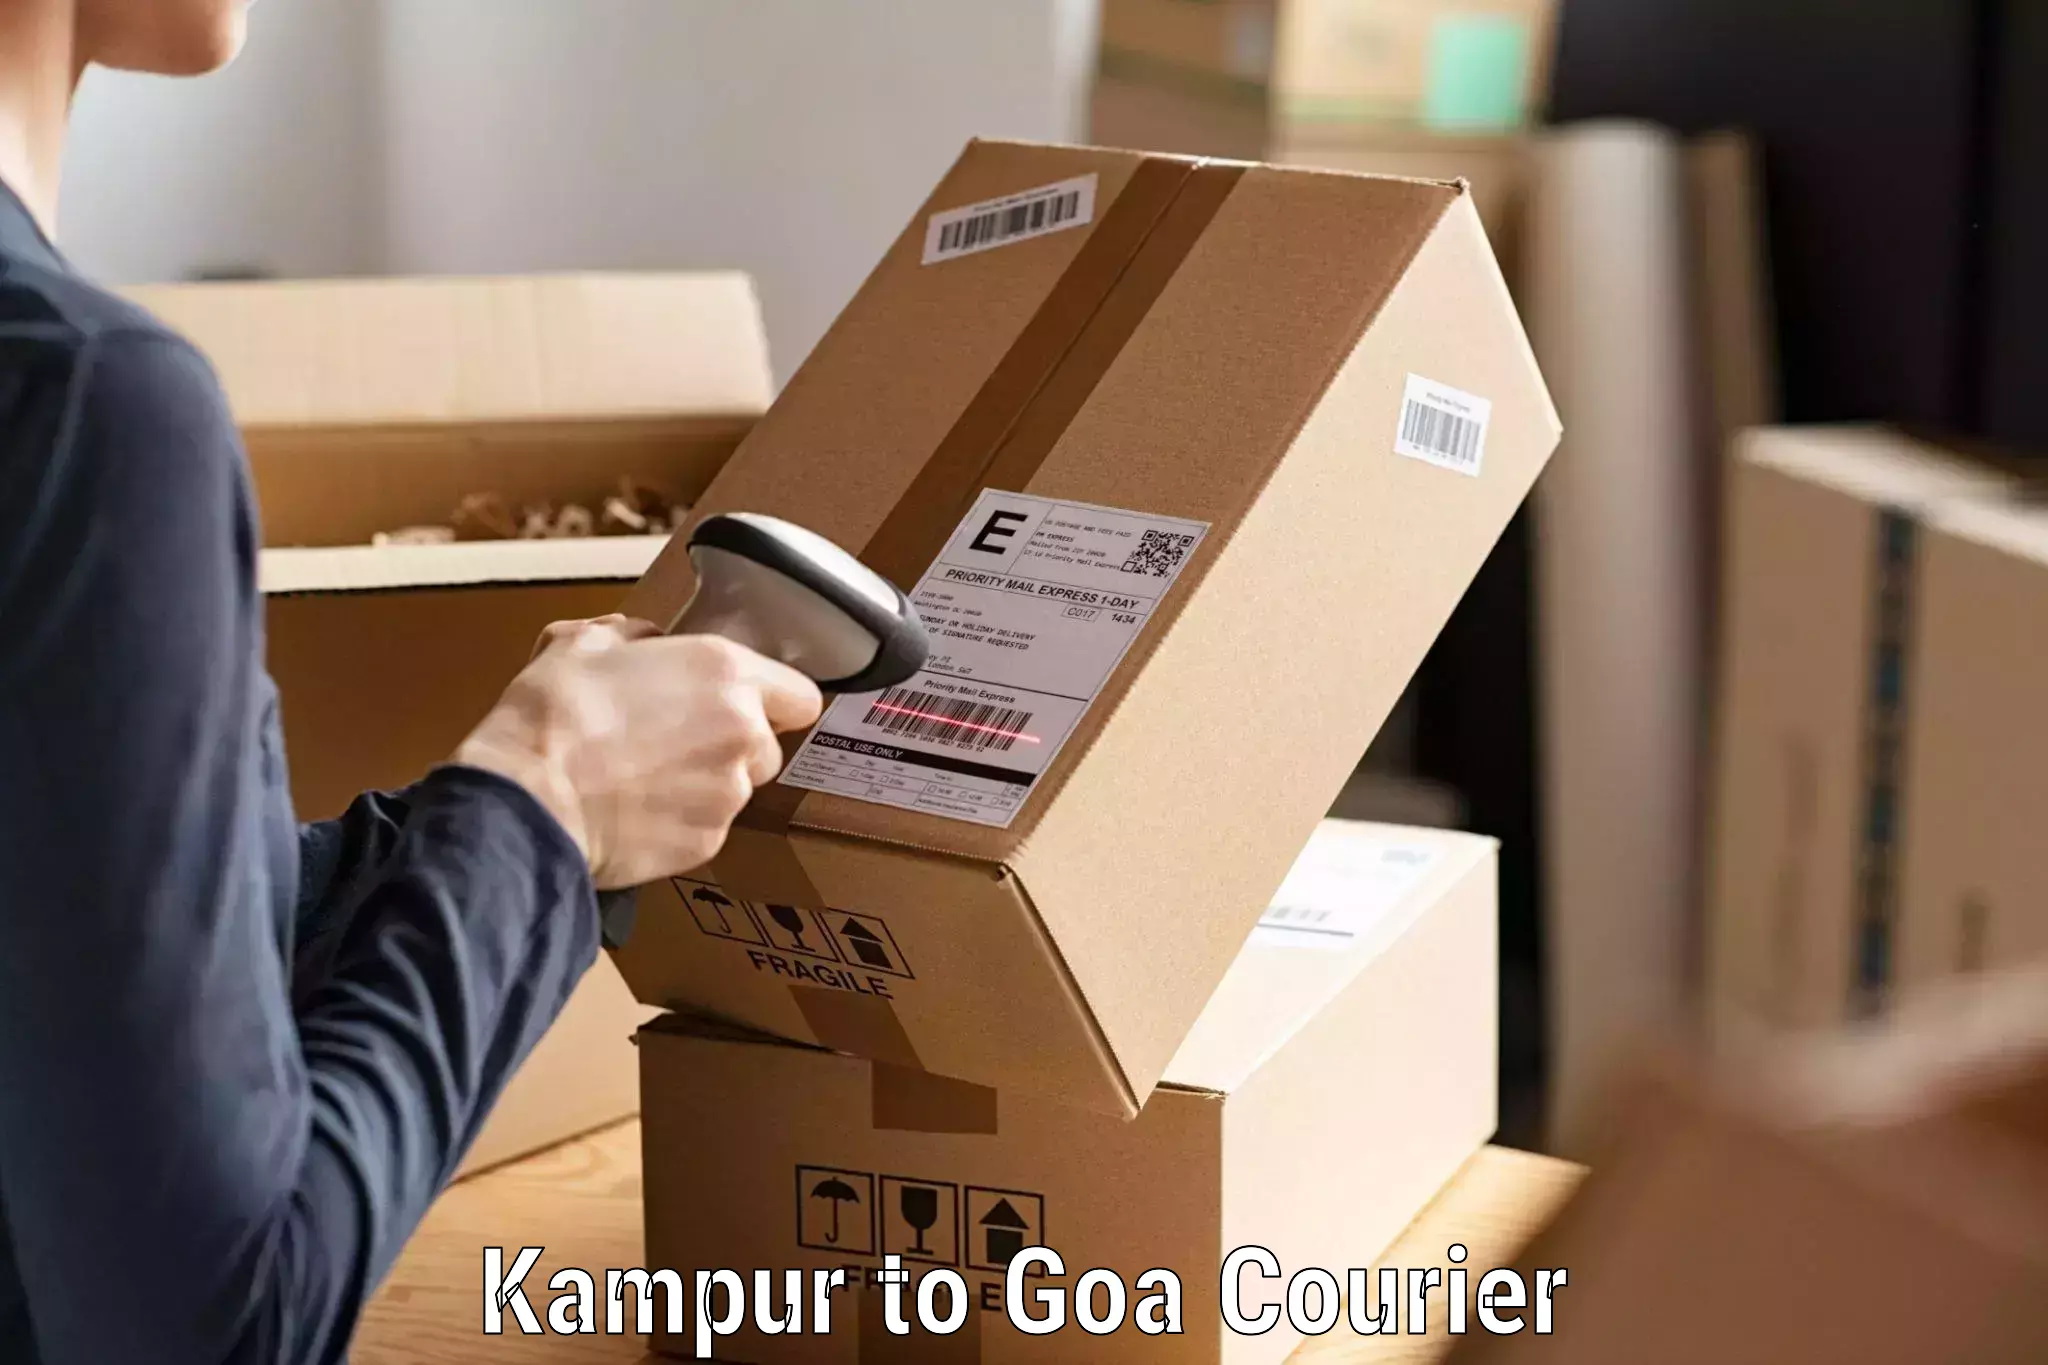 Delivery service partnership Kampur to Goa